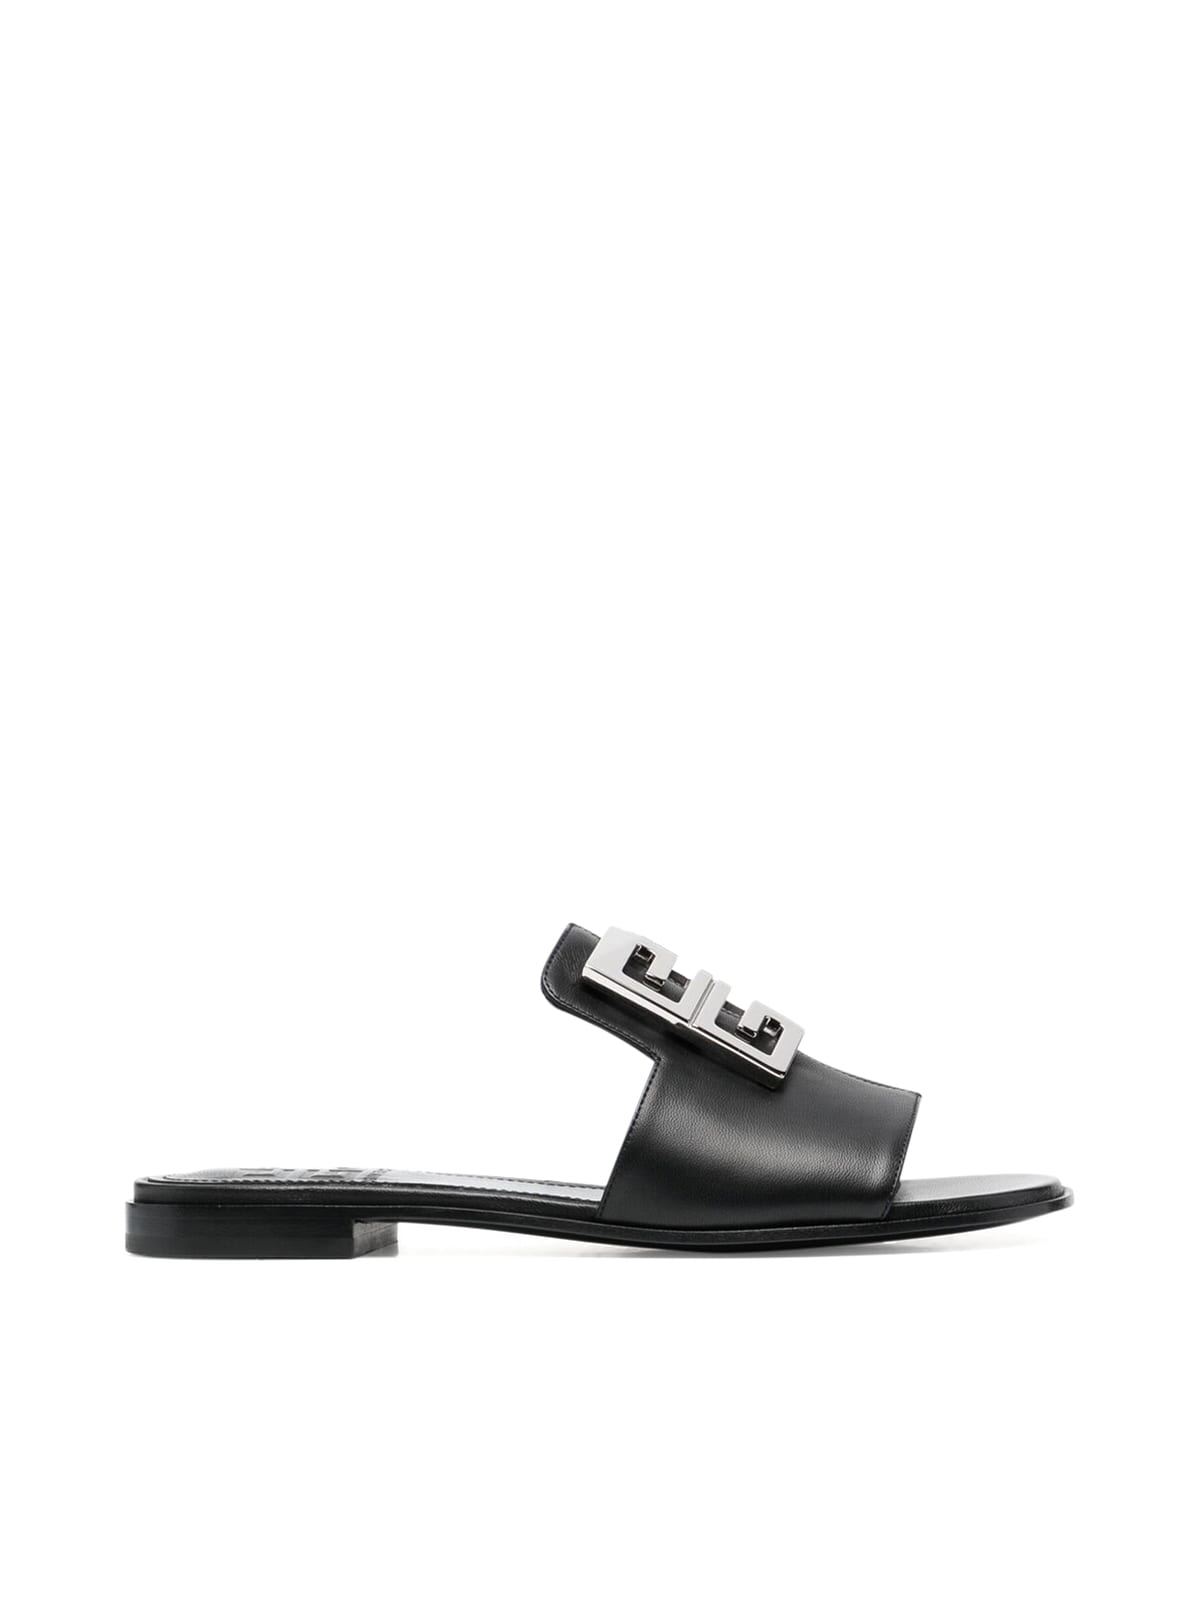 Buy Givenchy 4g Flat Mule Sandal online, shop Givenchy shoes with free shipping